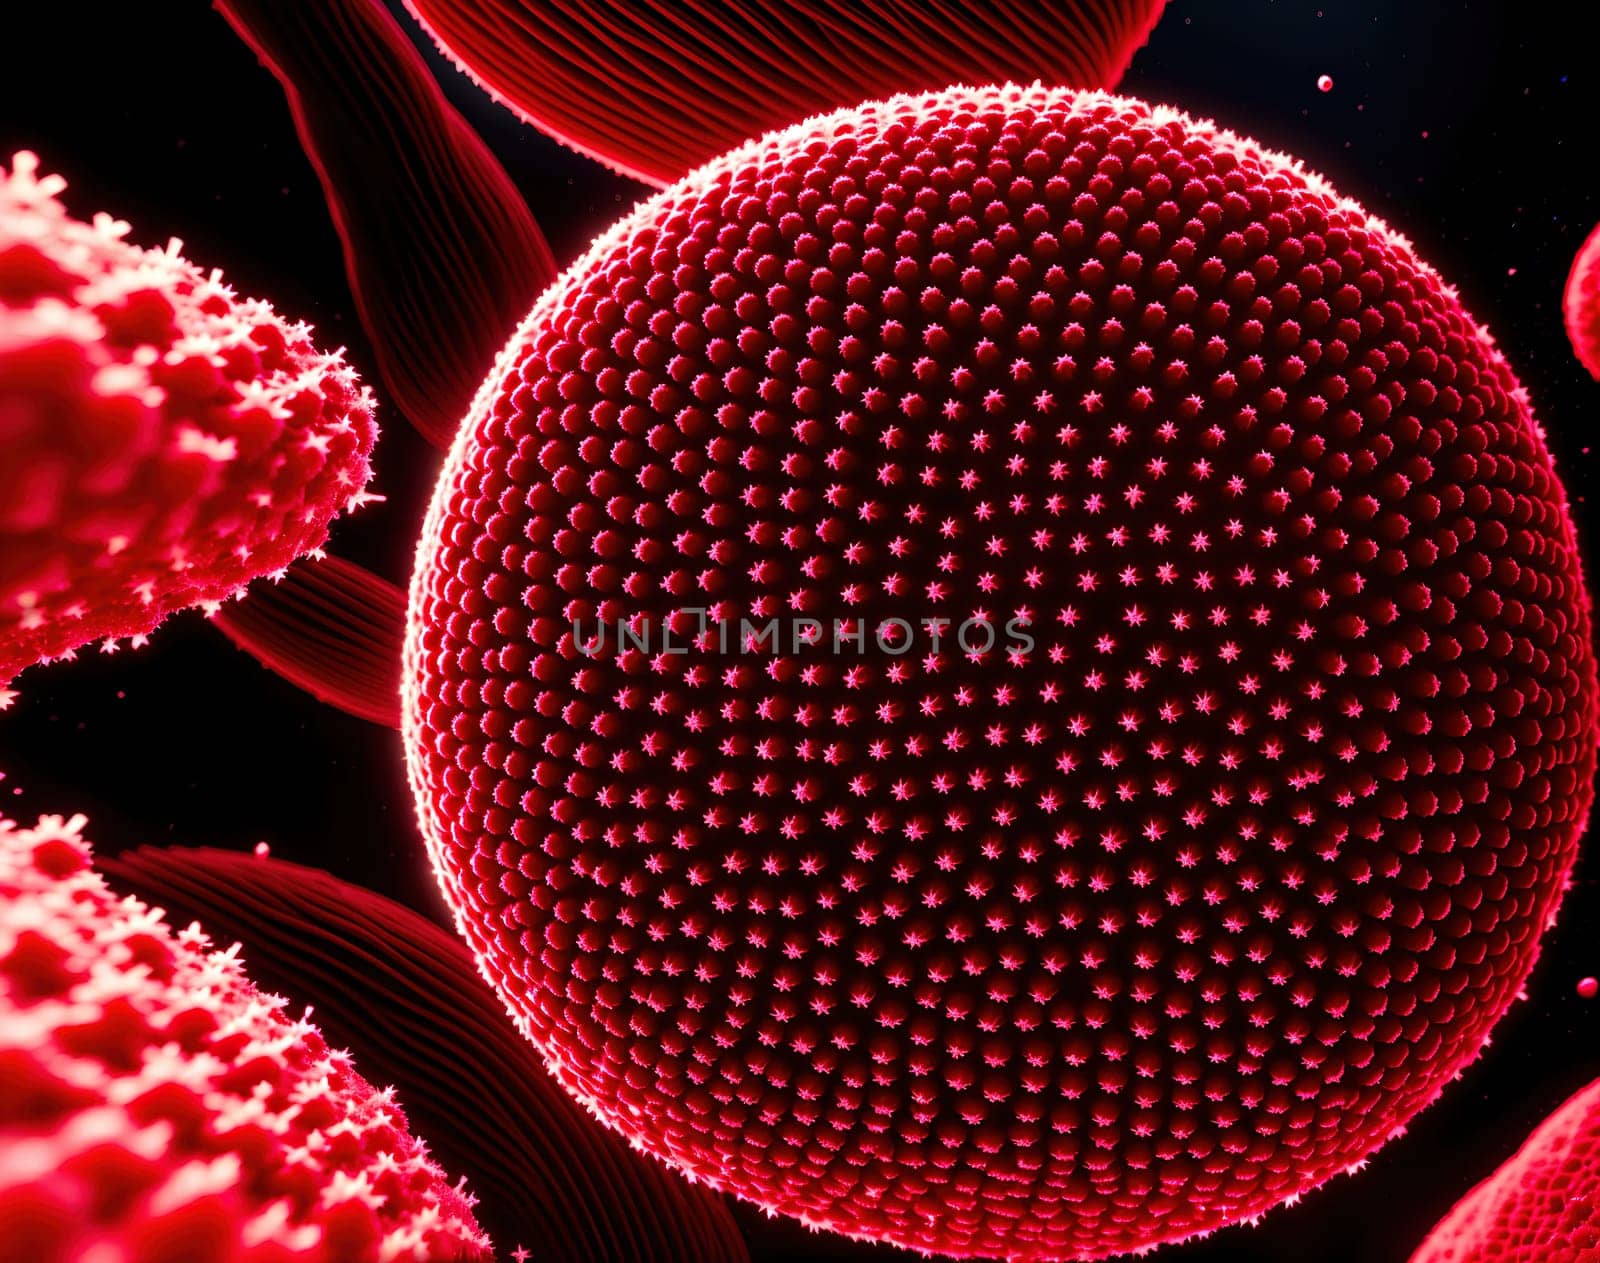 The image depicts a group of red and white cells arranged in a circular pattern.